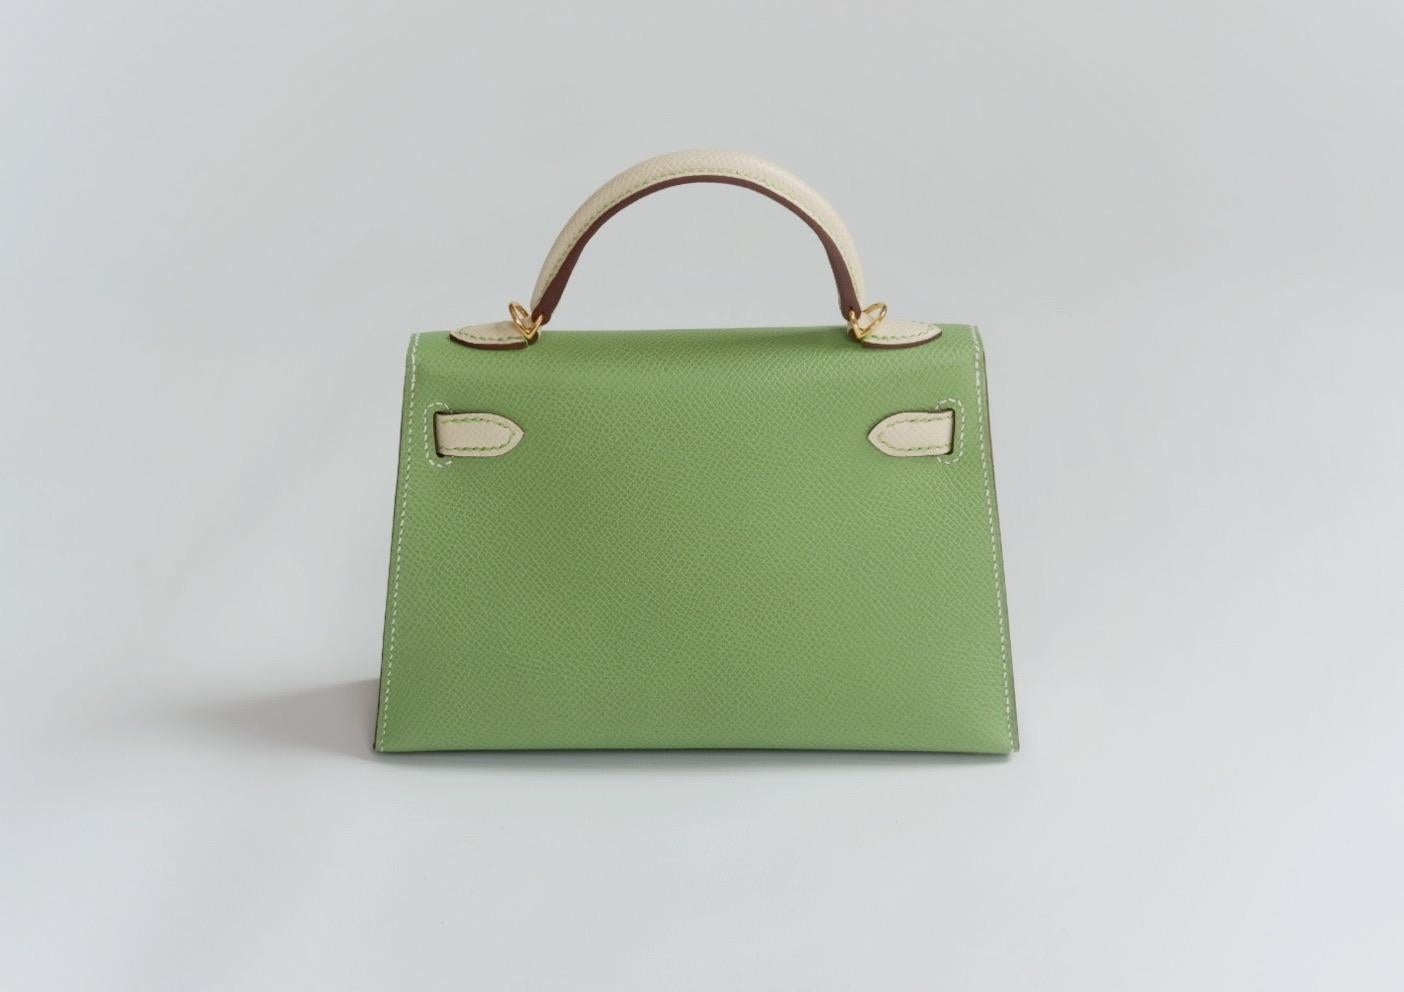 HSS made to order - Hermes Kelly 20cm (mini Kelly) Vert Criquet and Craie Sellier in Epsom leather with Gold Hardware (GHW). Brand new comes with box and accessories, full set and receipt.